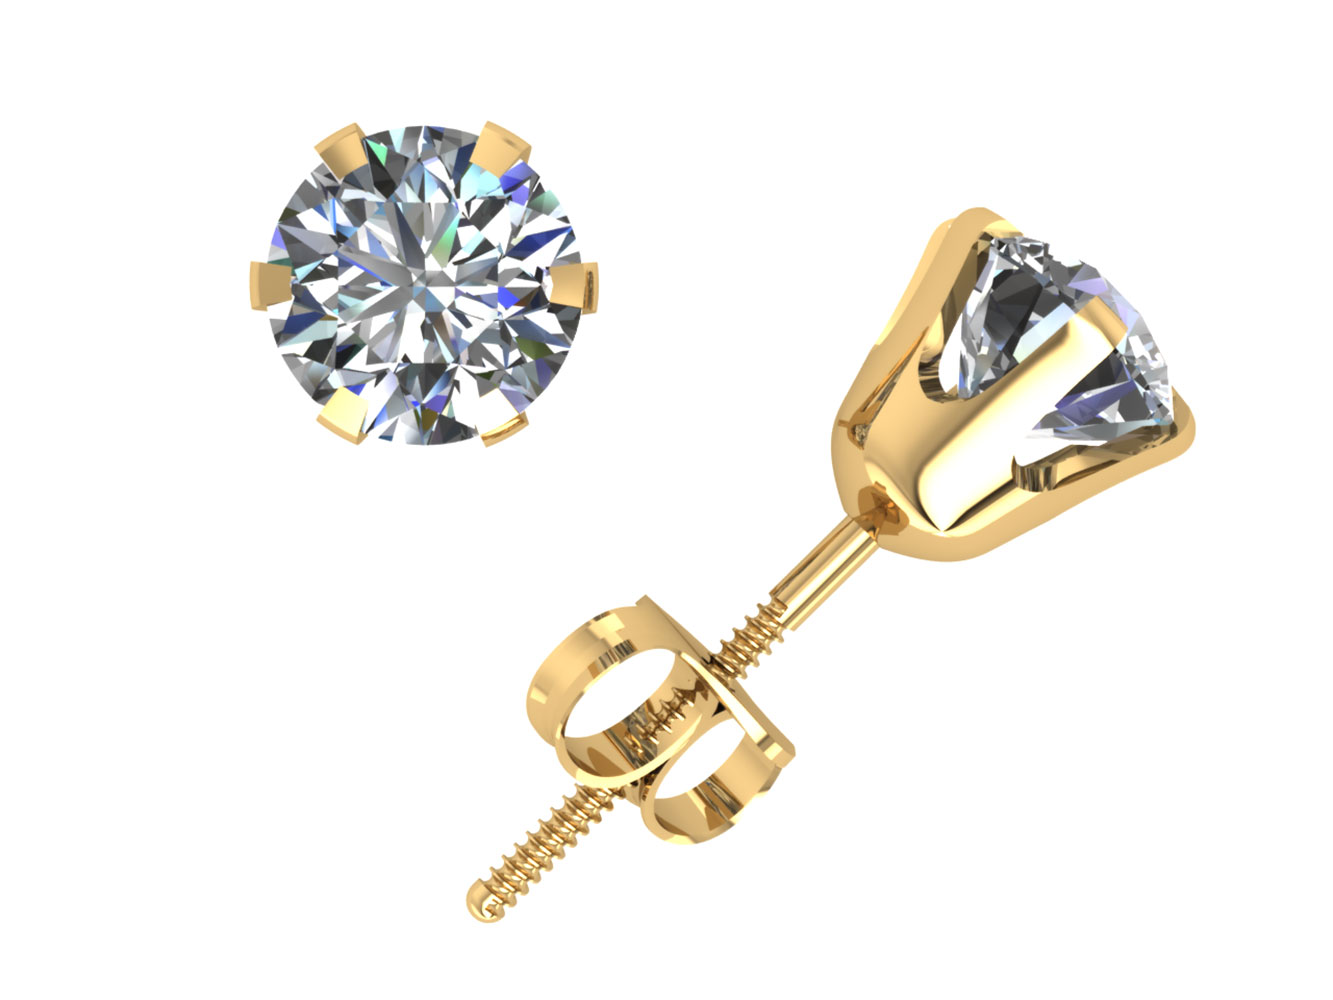 Jewel We Sell Real 1.25Ct Round Diamond Stud Earrings 14k White or Yellow Gold 6Prong ScrewBack I SI2